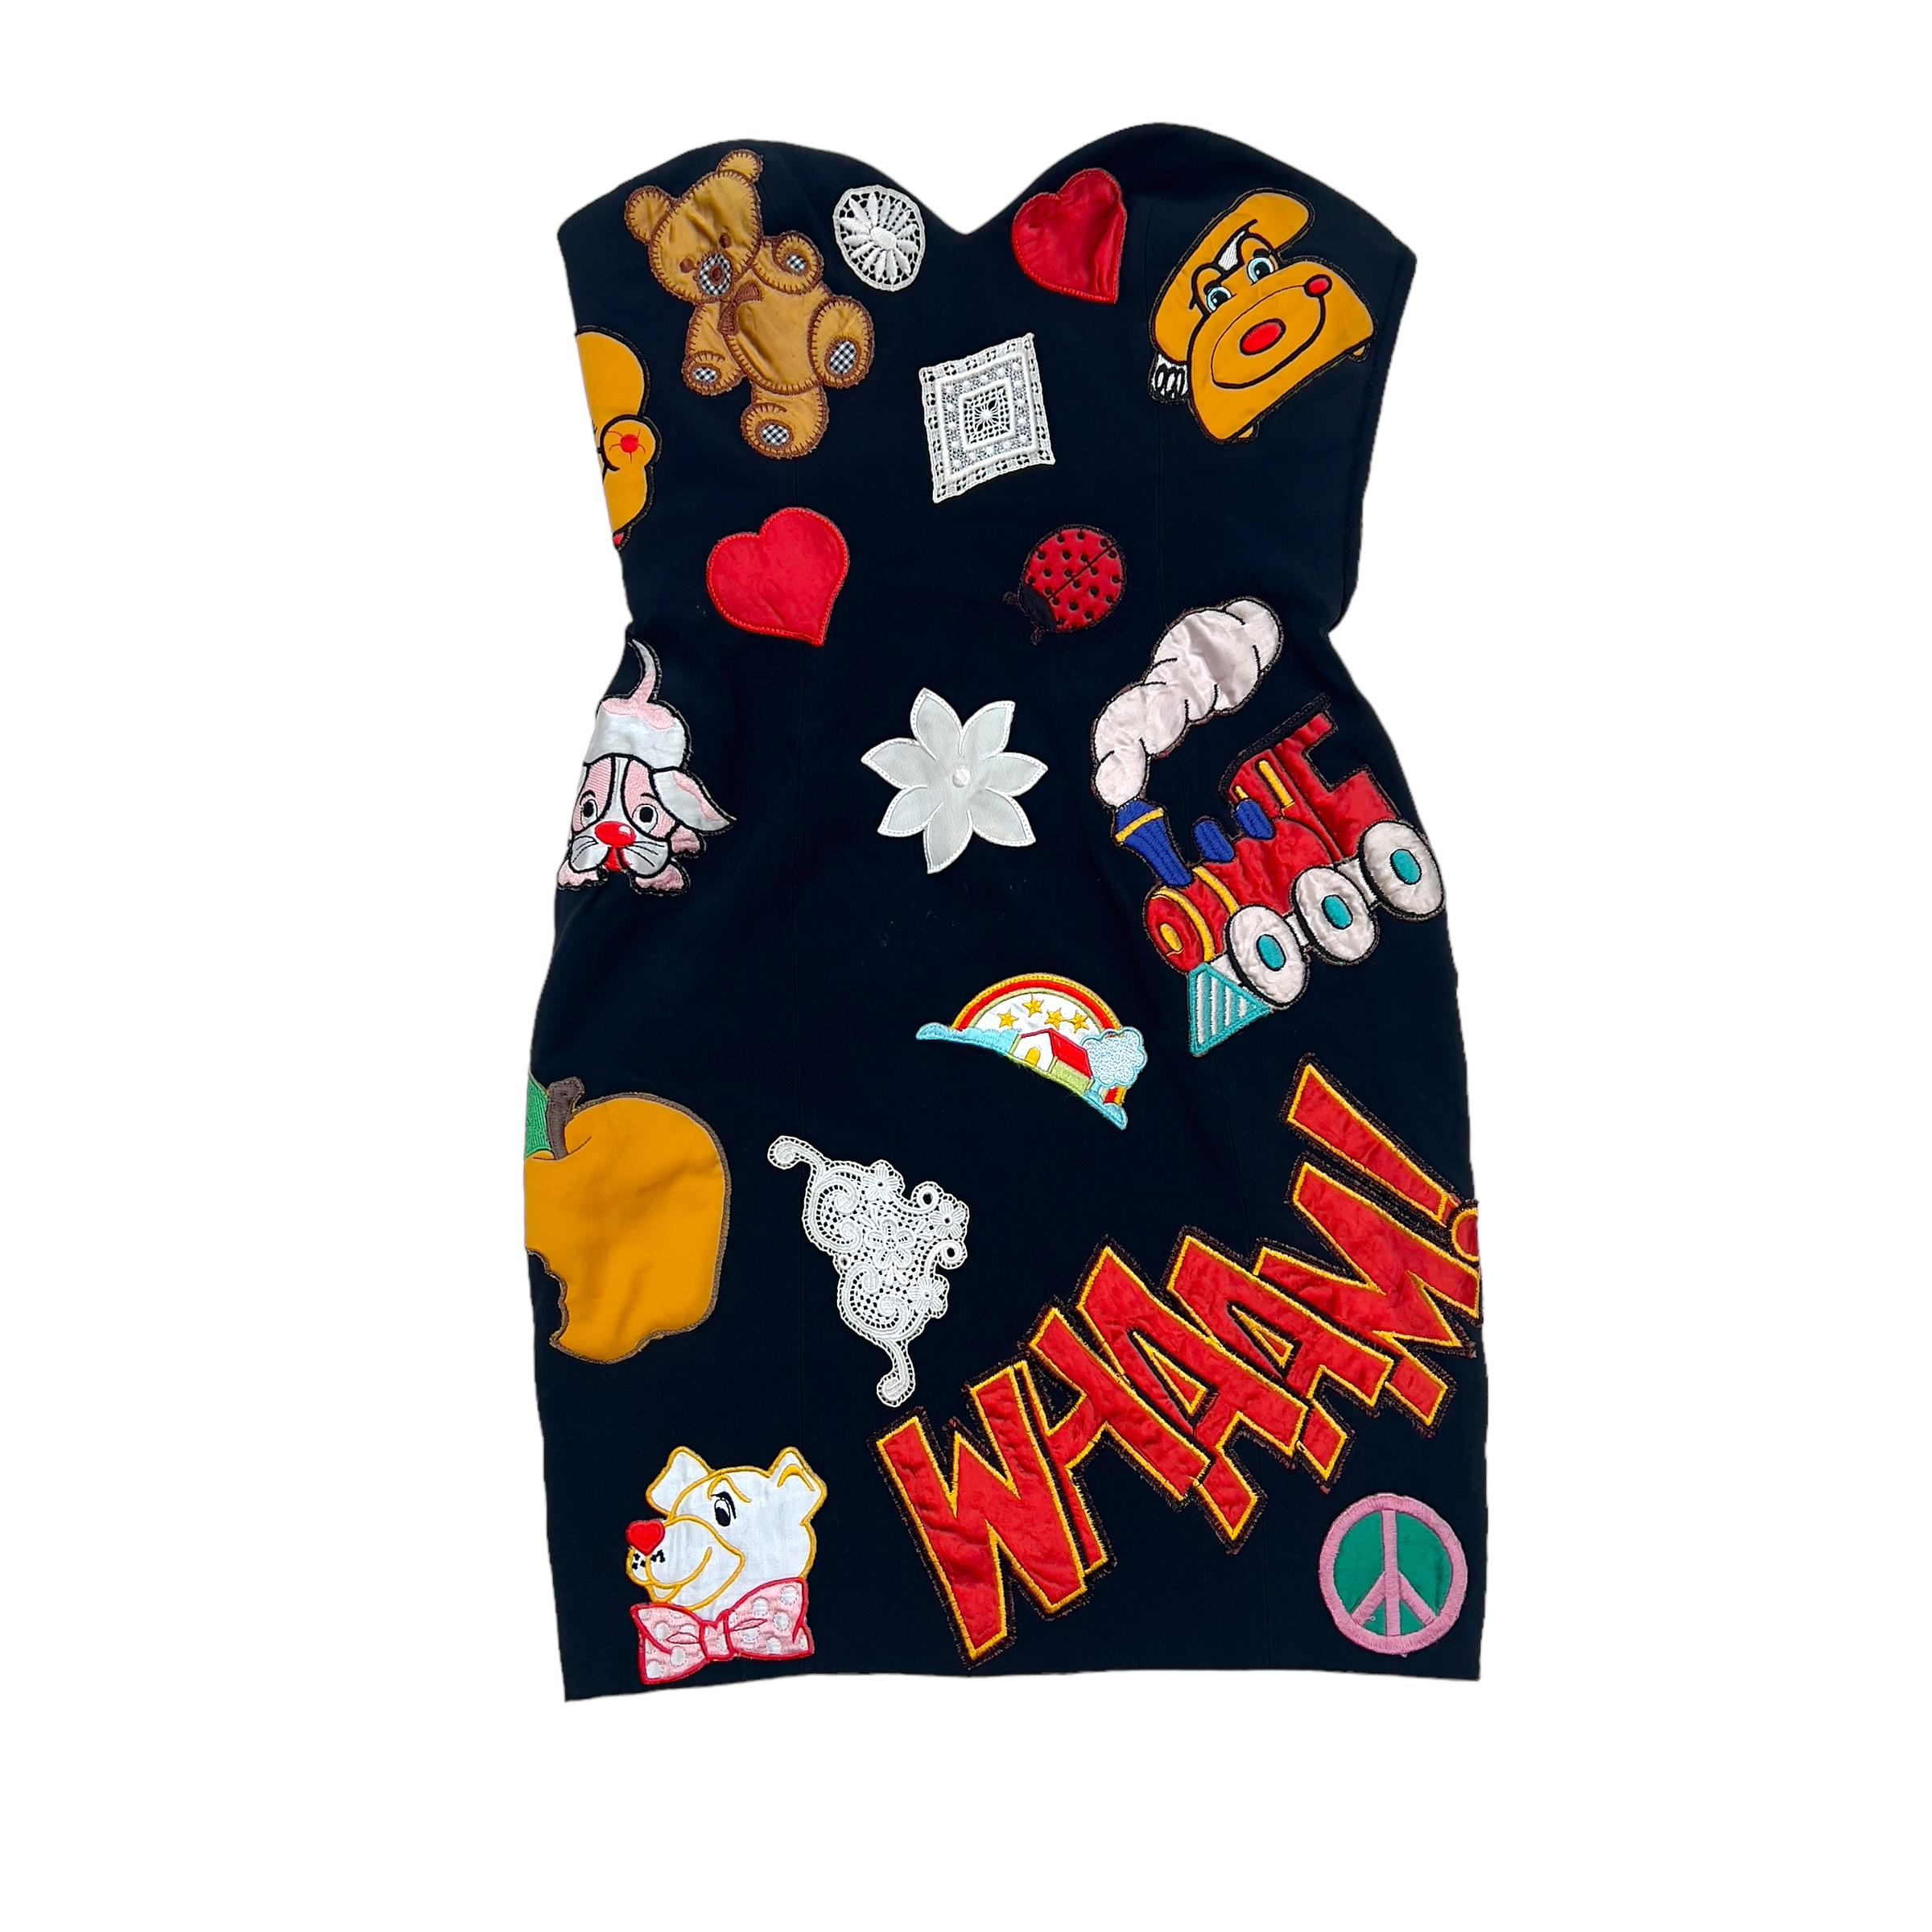 Women's 1993 Moschino runway kiss my patch dress For Sale